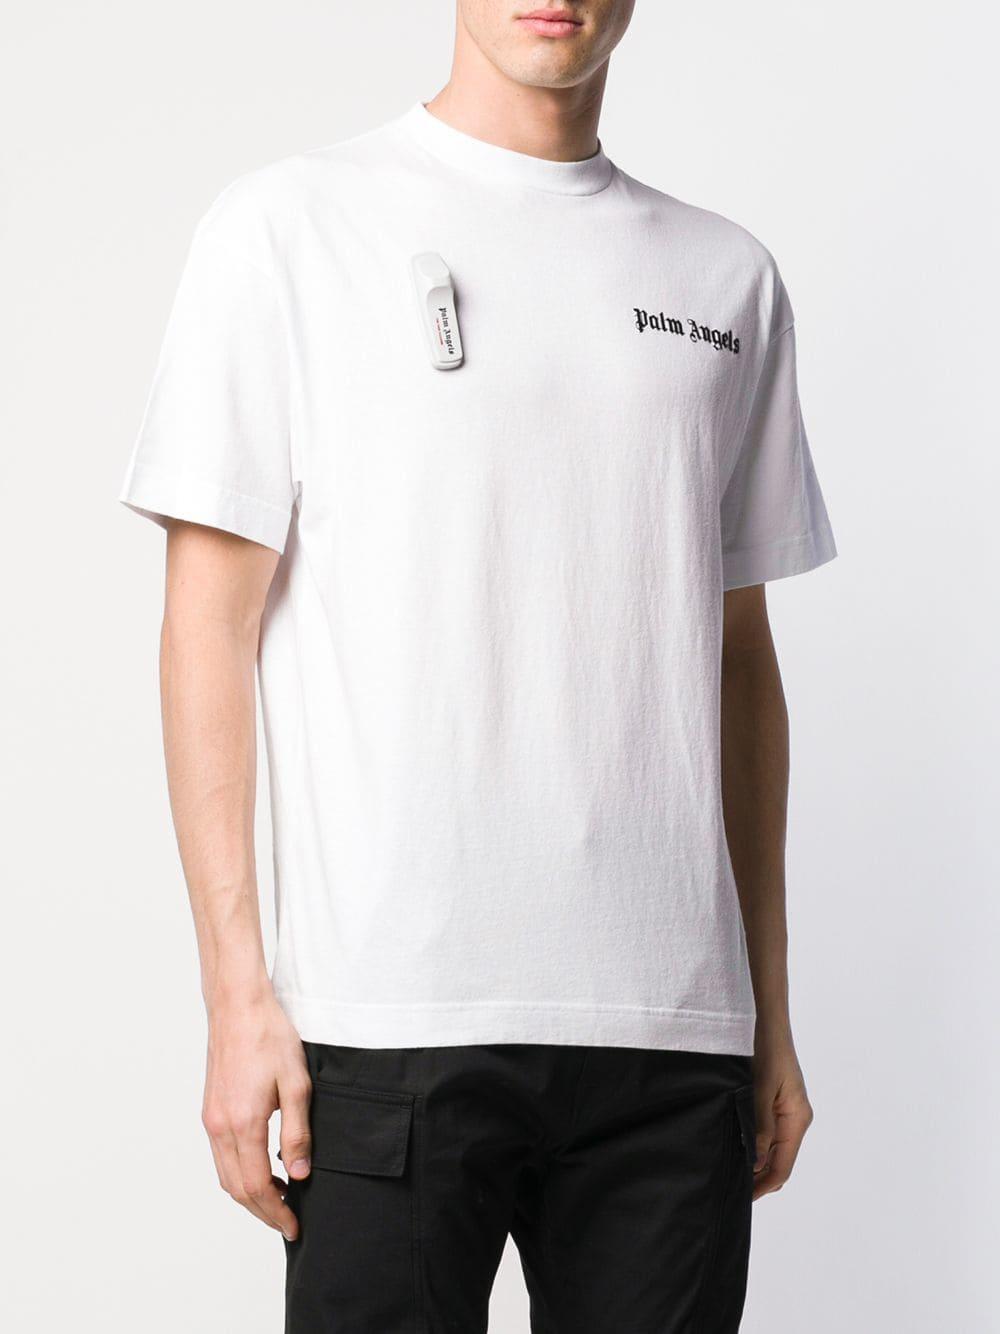 palm angels security tag tee